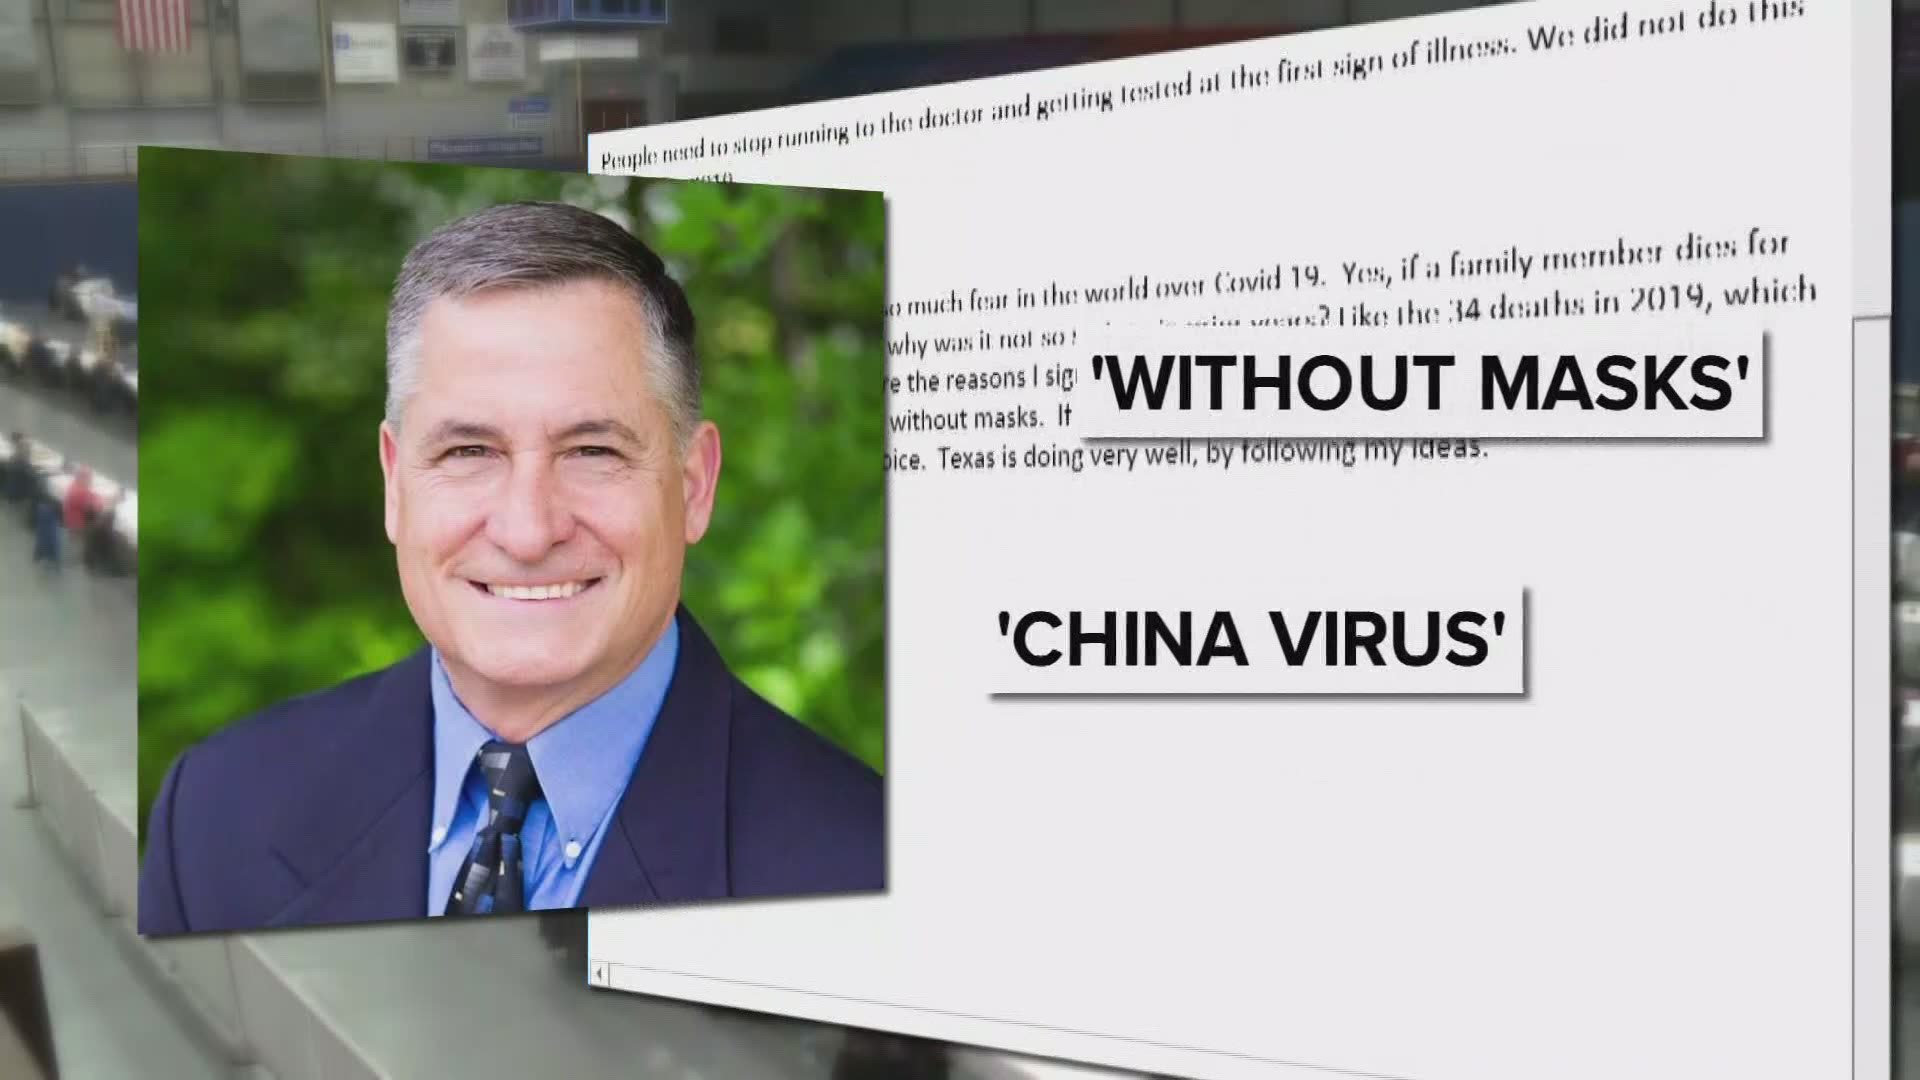 Republican representative Michael Lemelin refered to the coronavirus as the "China Virus" in an email response to Mainer.